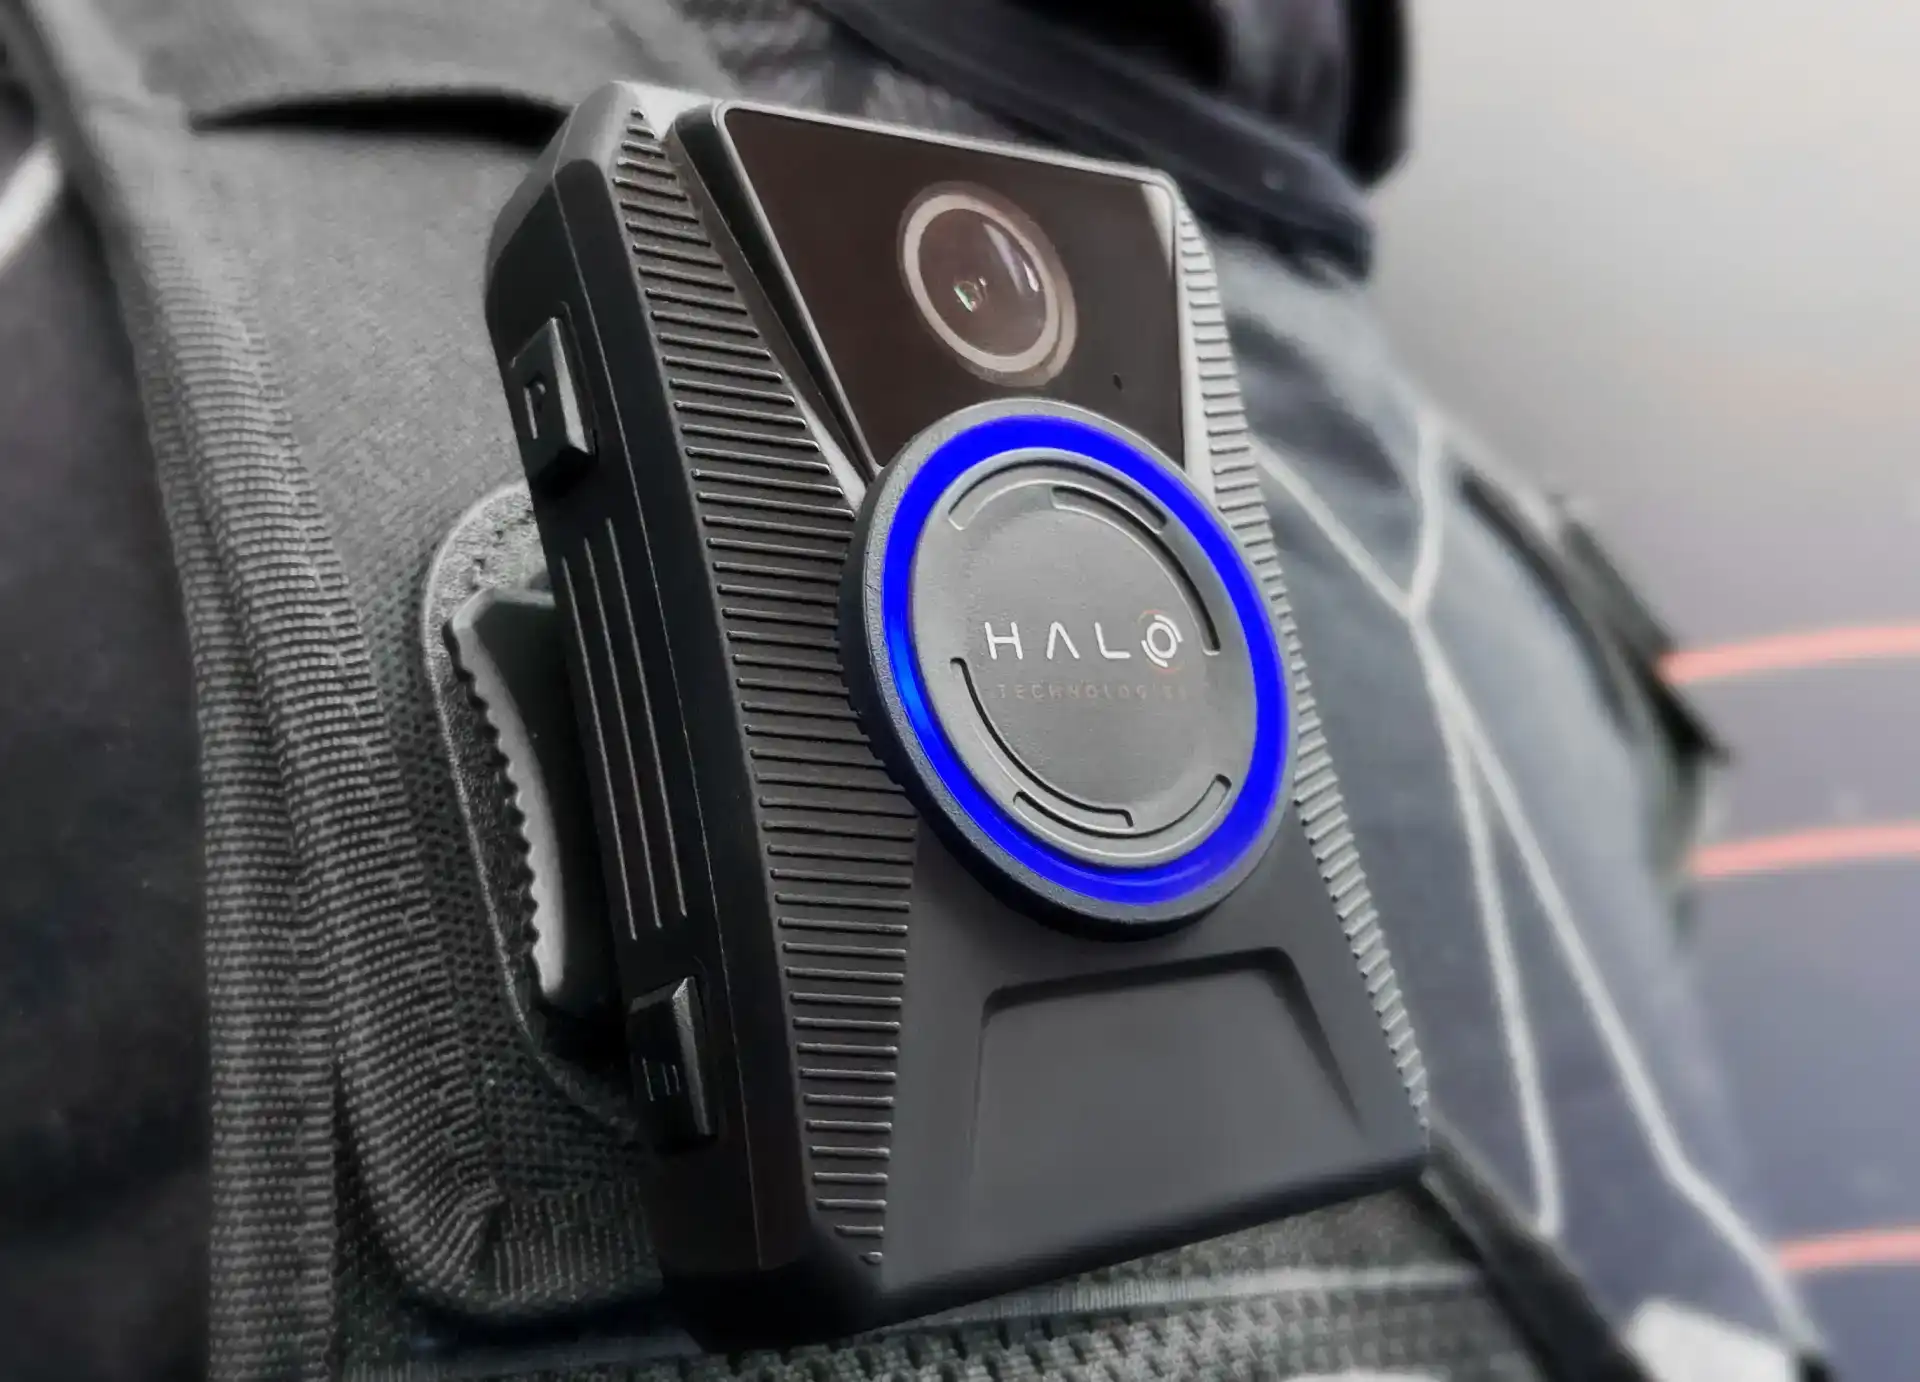 Using body cameras to mitigate false accusations against police